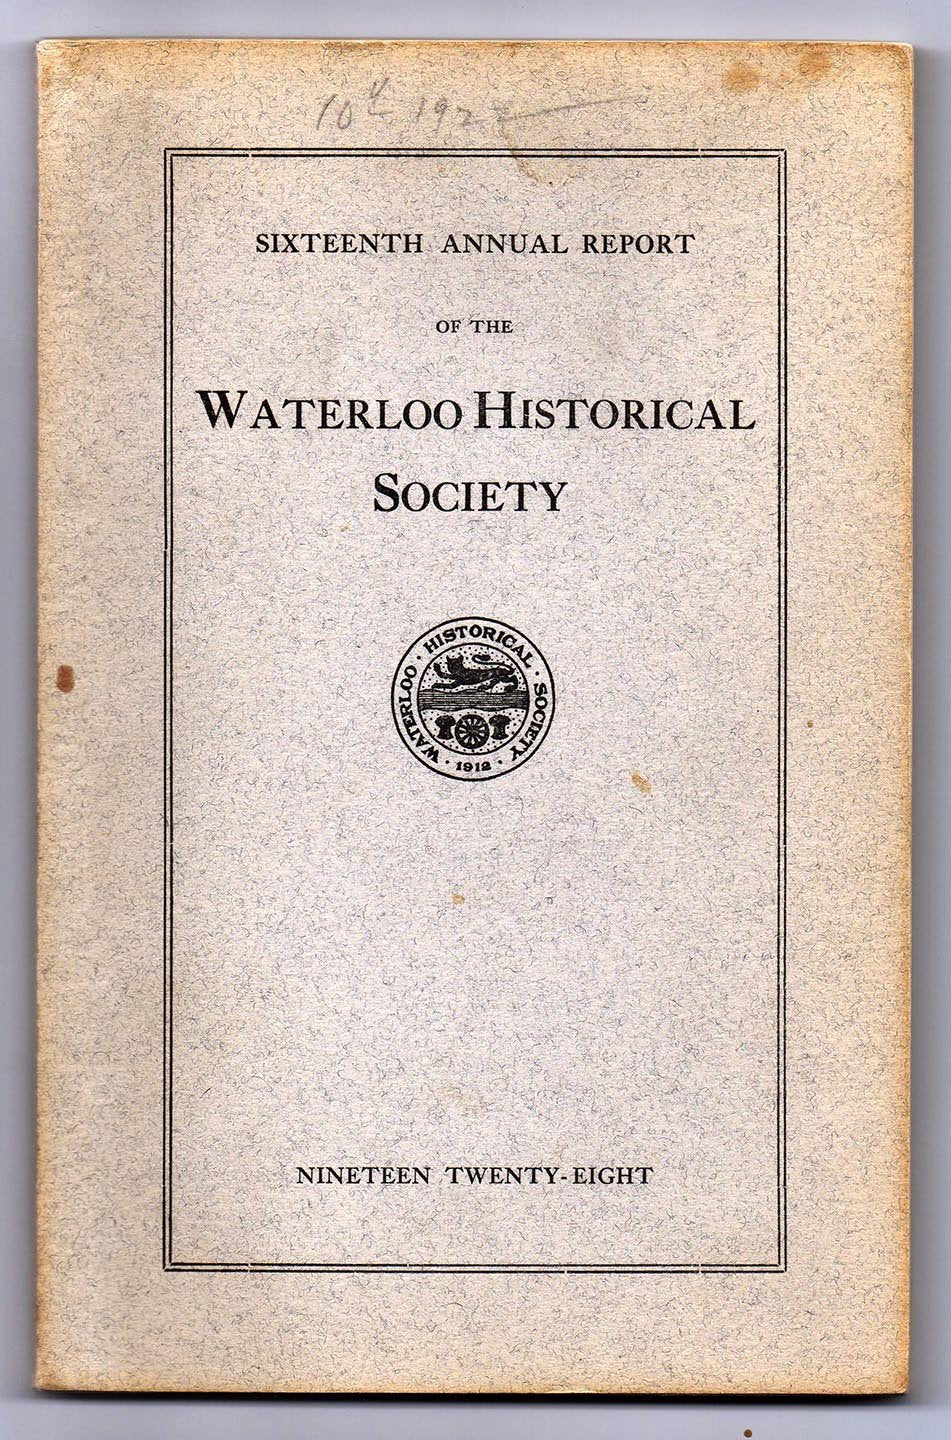 Sixteenth Annual Report of the Waterloo Historical Society 1928